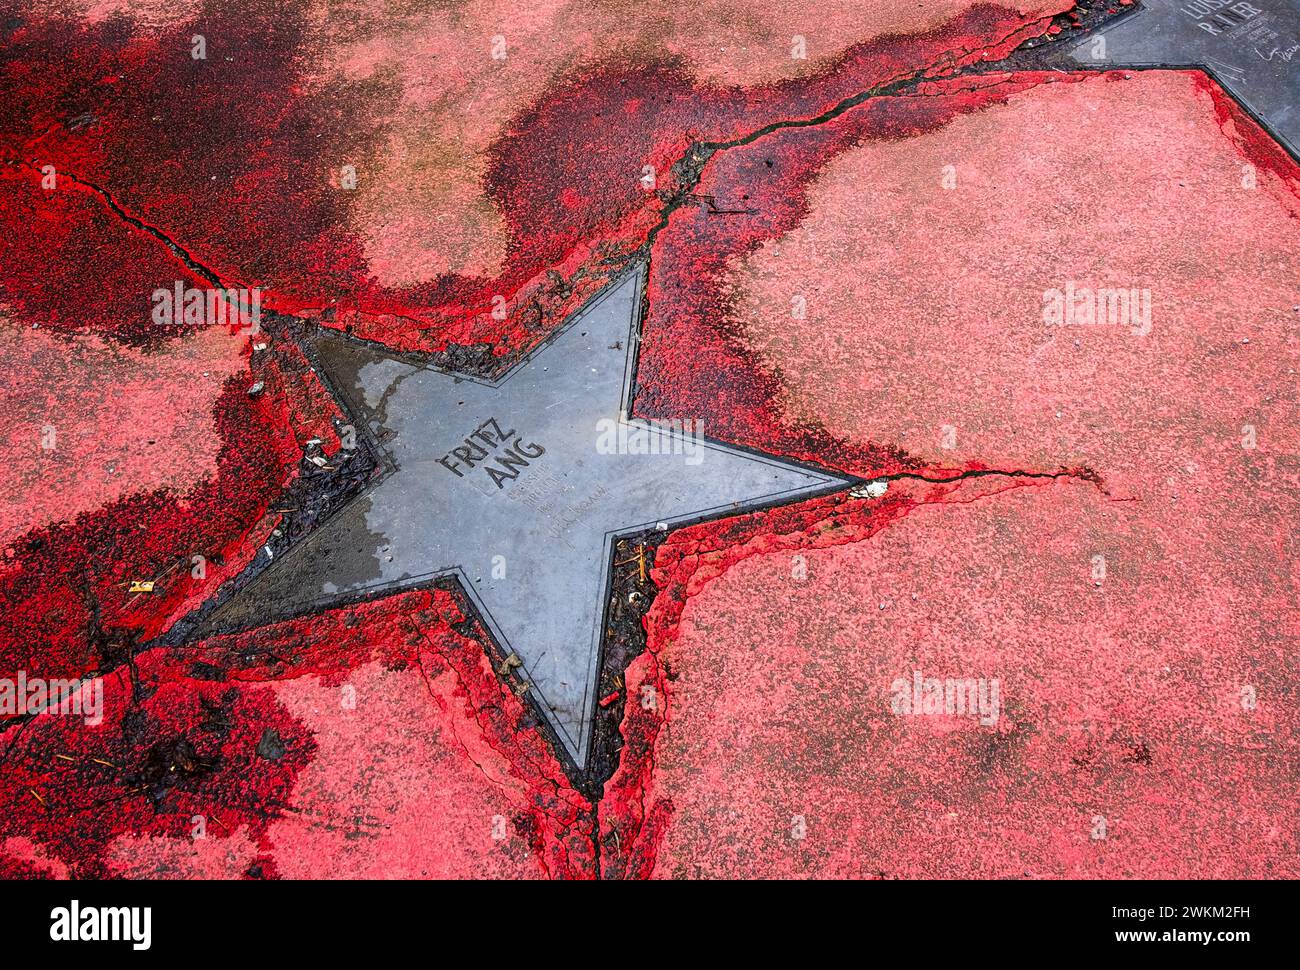 Star dedicated to Austrian film director Fritz Lang on derelict Boulevard of Stars in central Berlin, German version of the Hollywood Walk of Fame Stock Photo